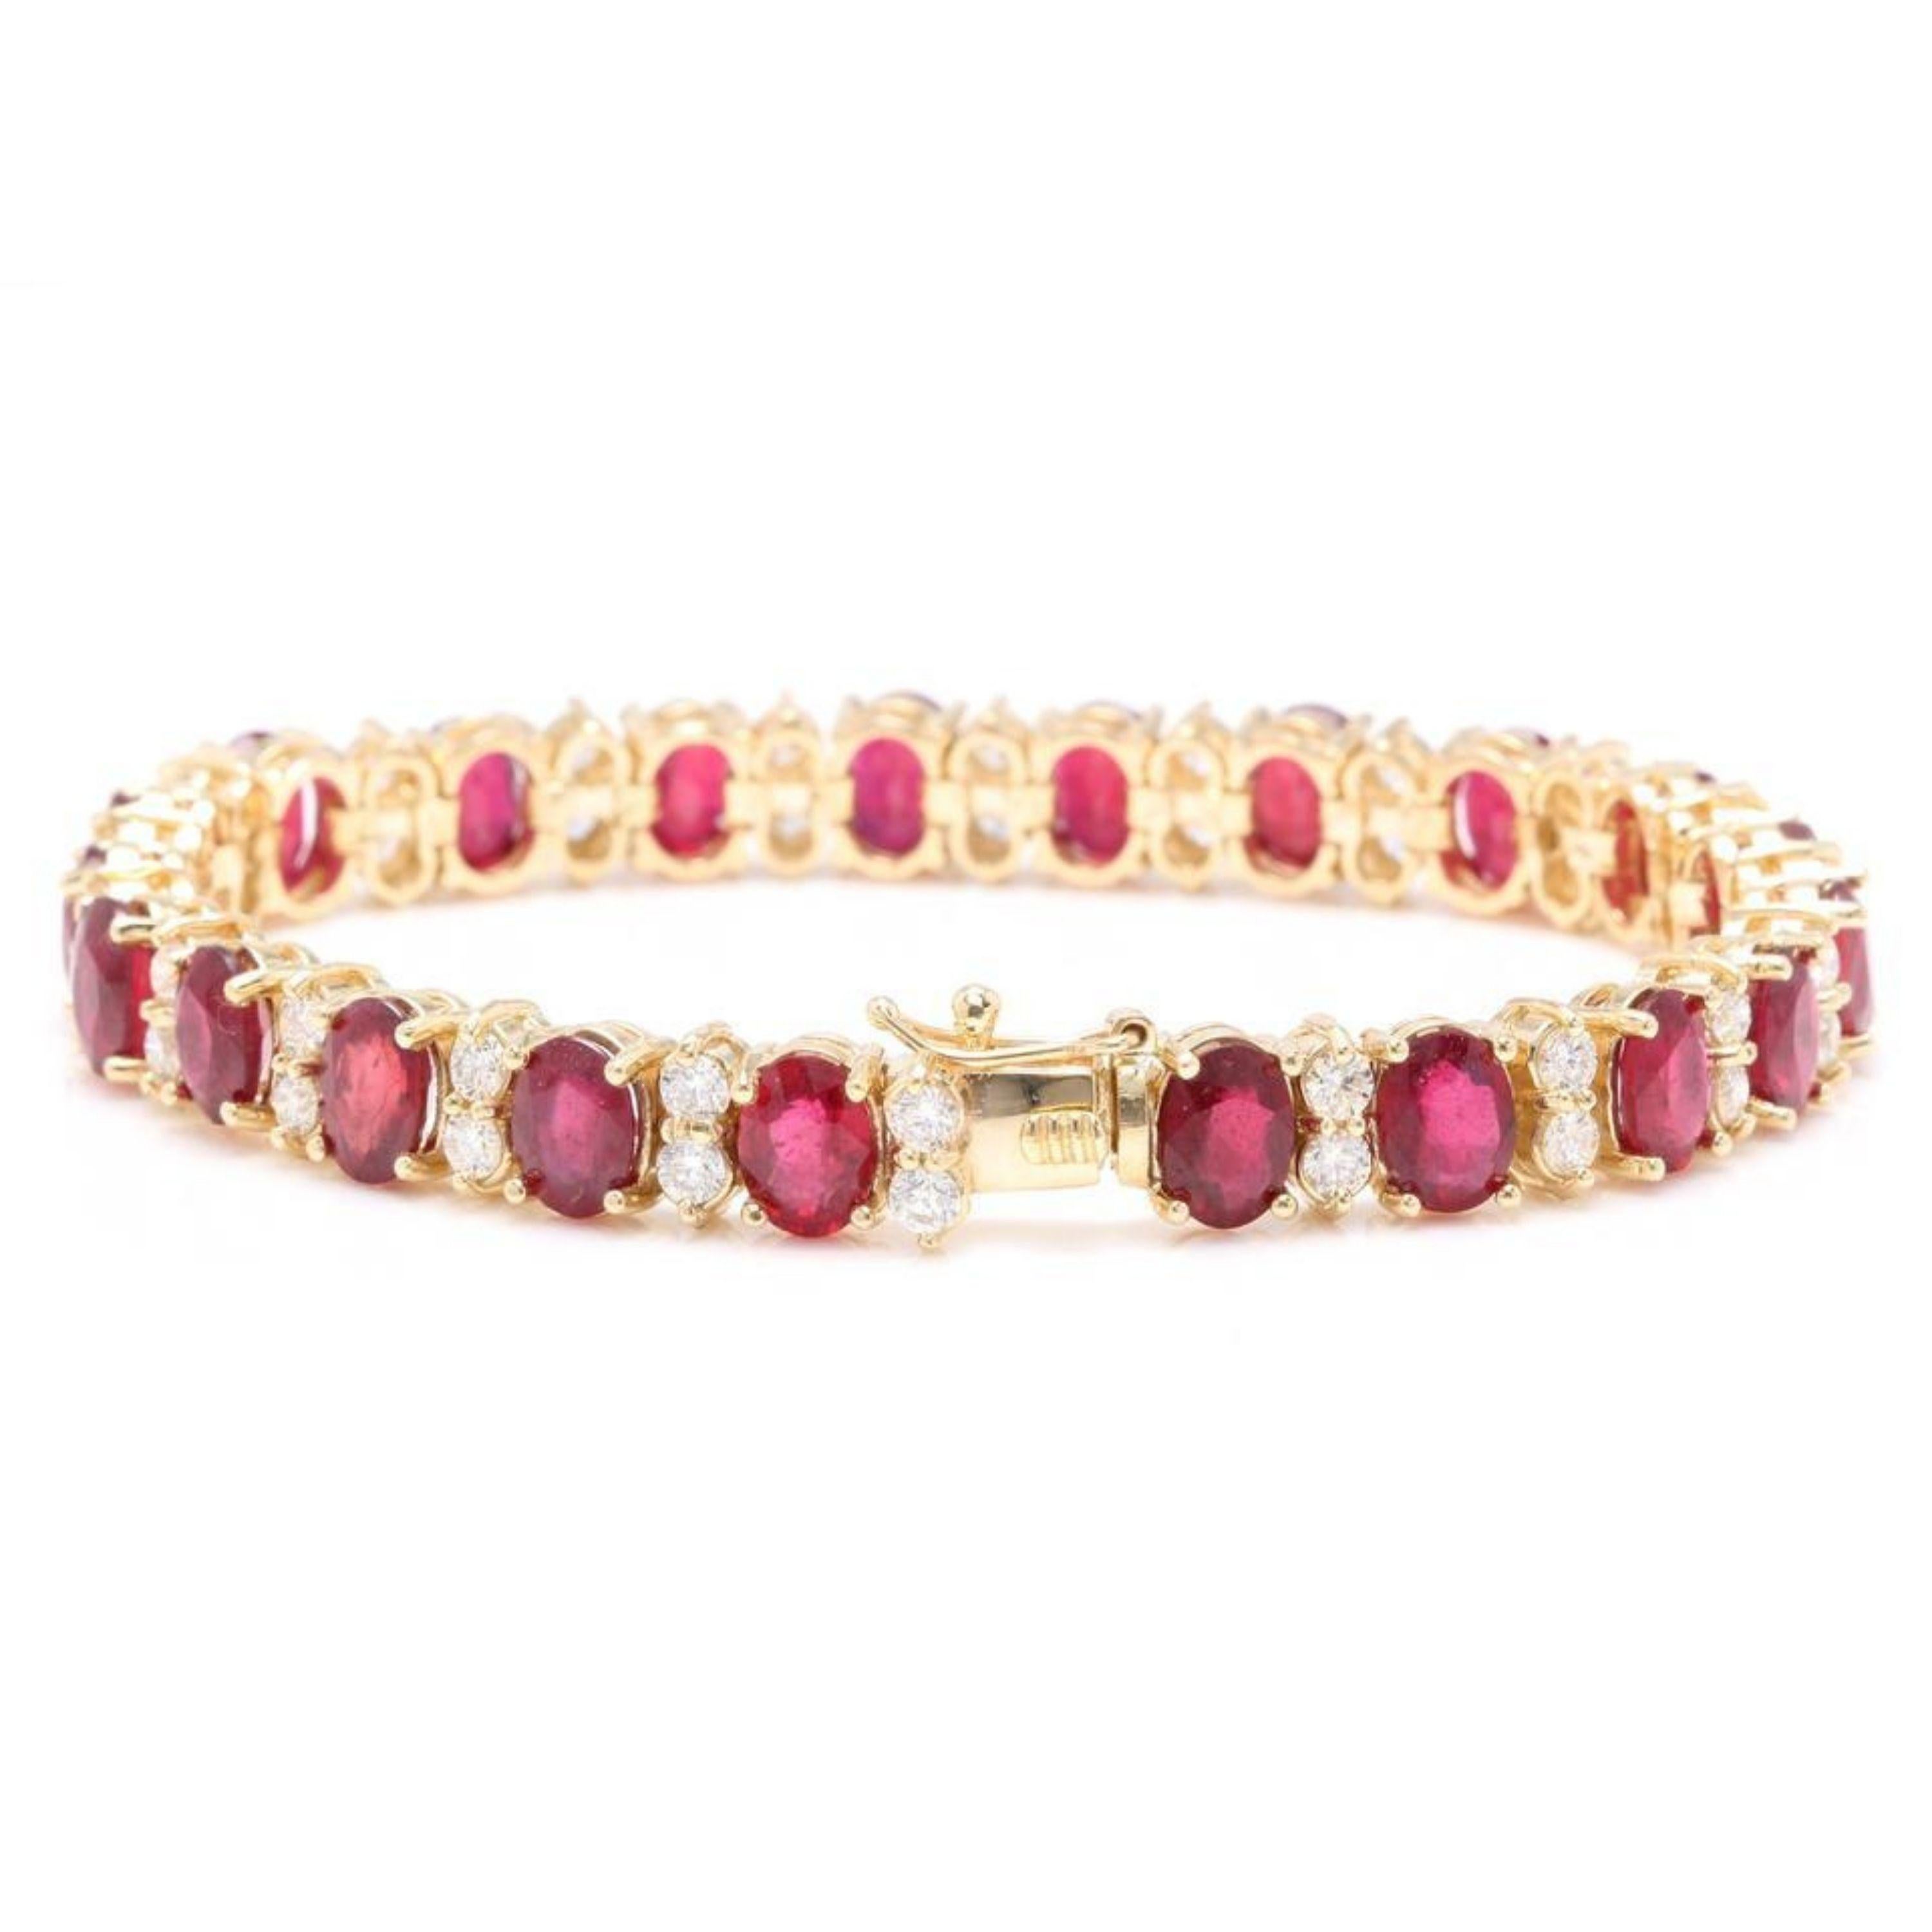 Very Beautiful 29.80 Carats Ruby & Natural Diamond 14K Solid Yellow Gold Bracelet

STAMPED: 14K

Total Natural Round Diamonds Weight: 3.80 Carats (color G-H / Clarity SI1-SI2)

Total Natural Ruby Weight is: 26.00 carats (Lead Glass Filled)

Bracelet